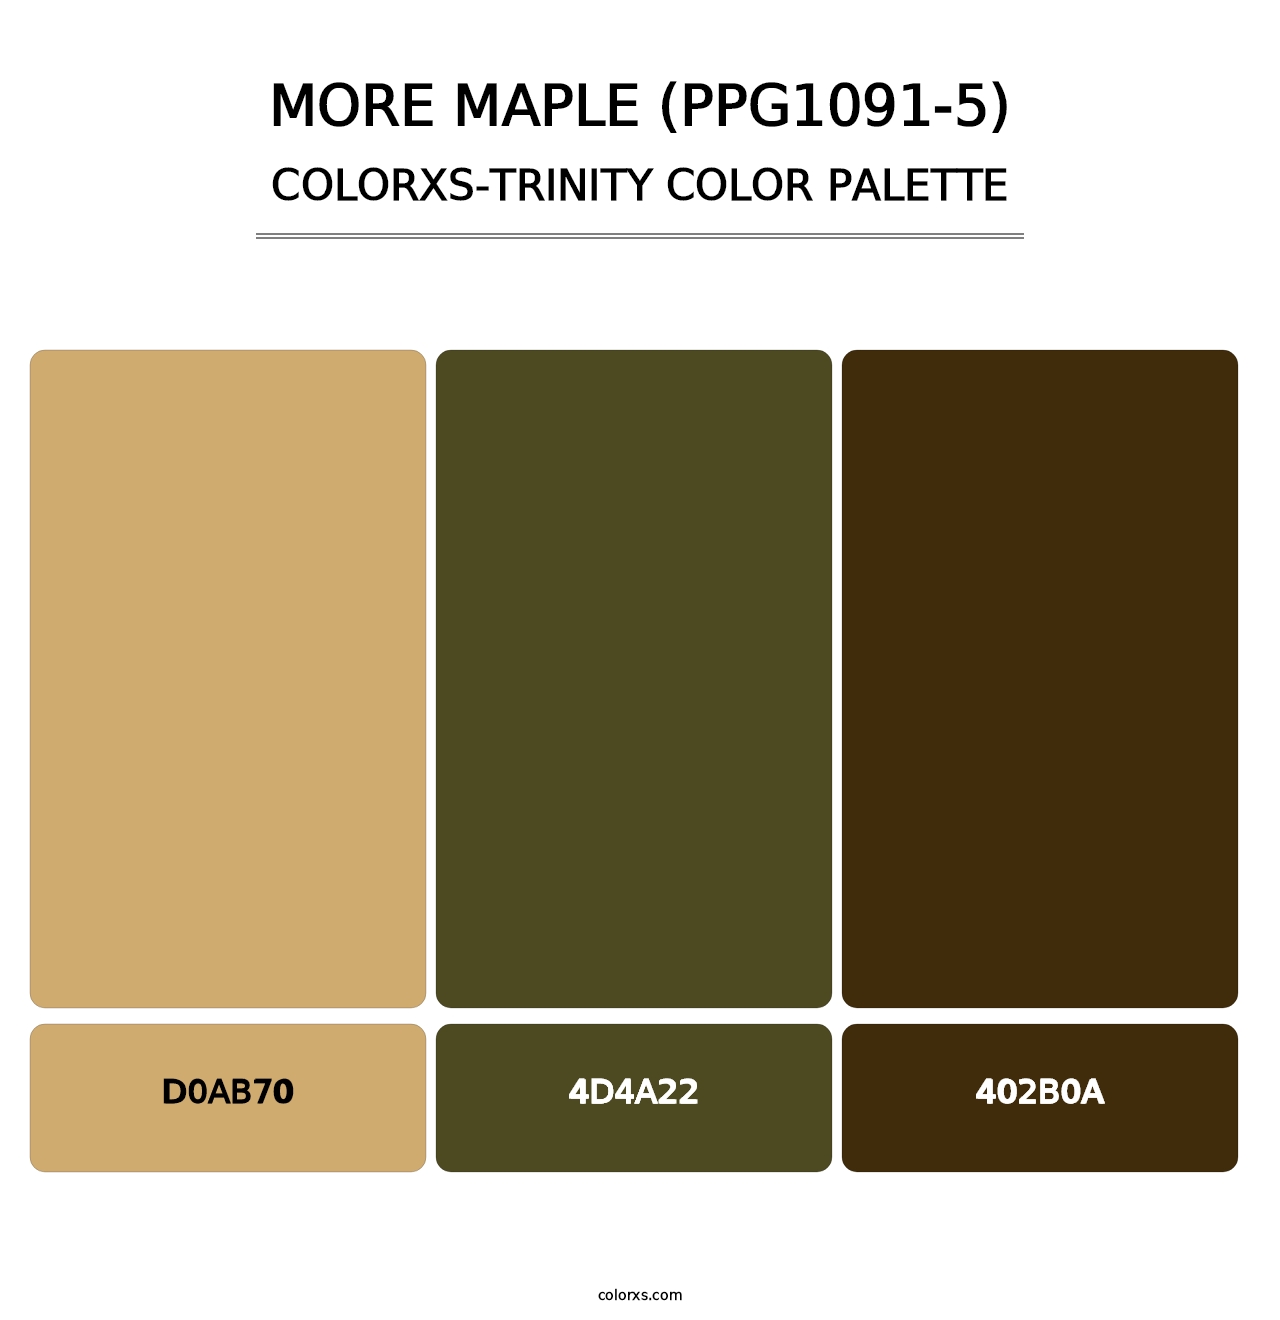 More Maple (PPG1091-5) - Colorxs Trinity Palette